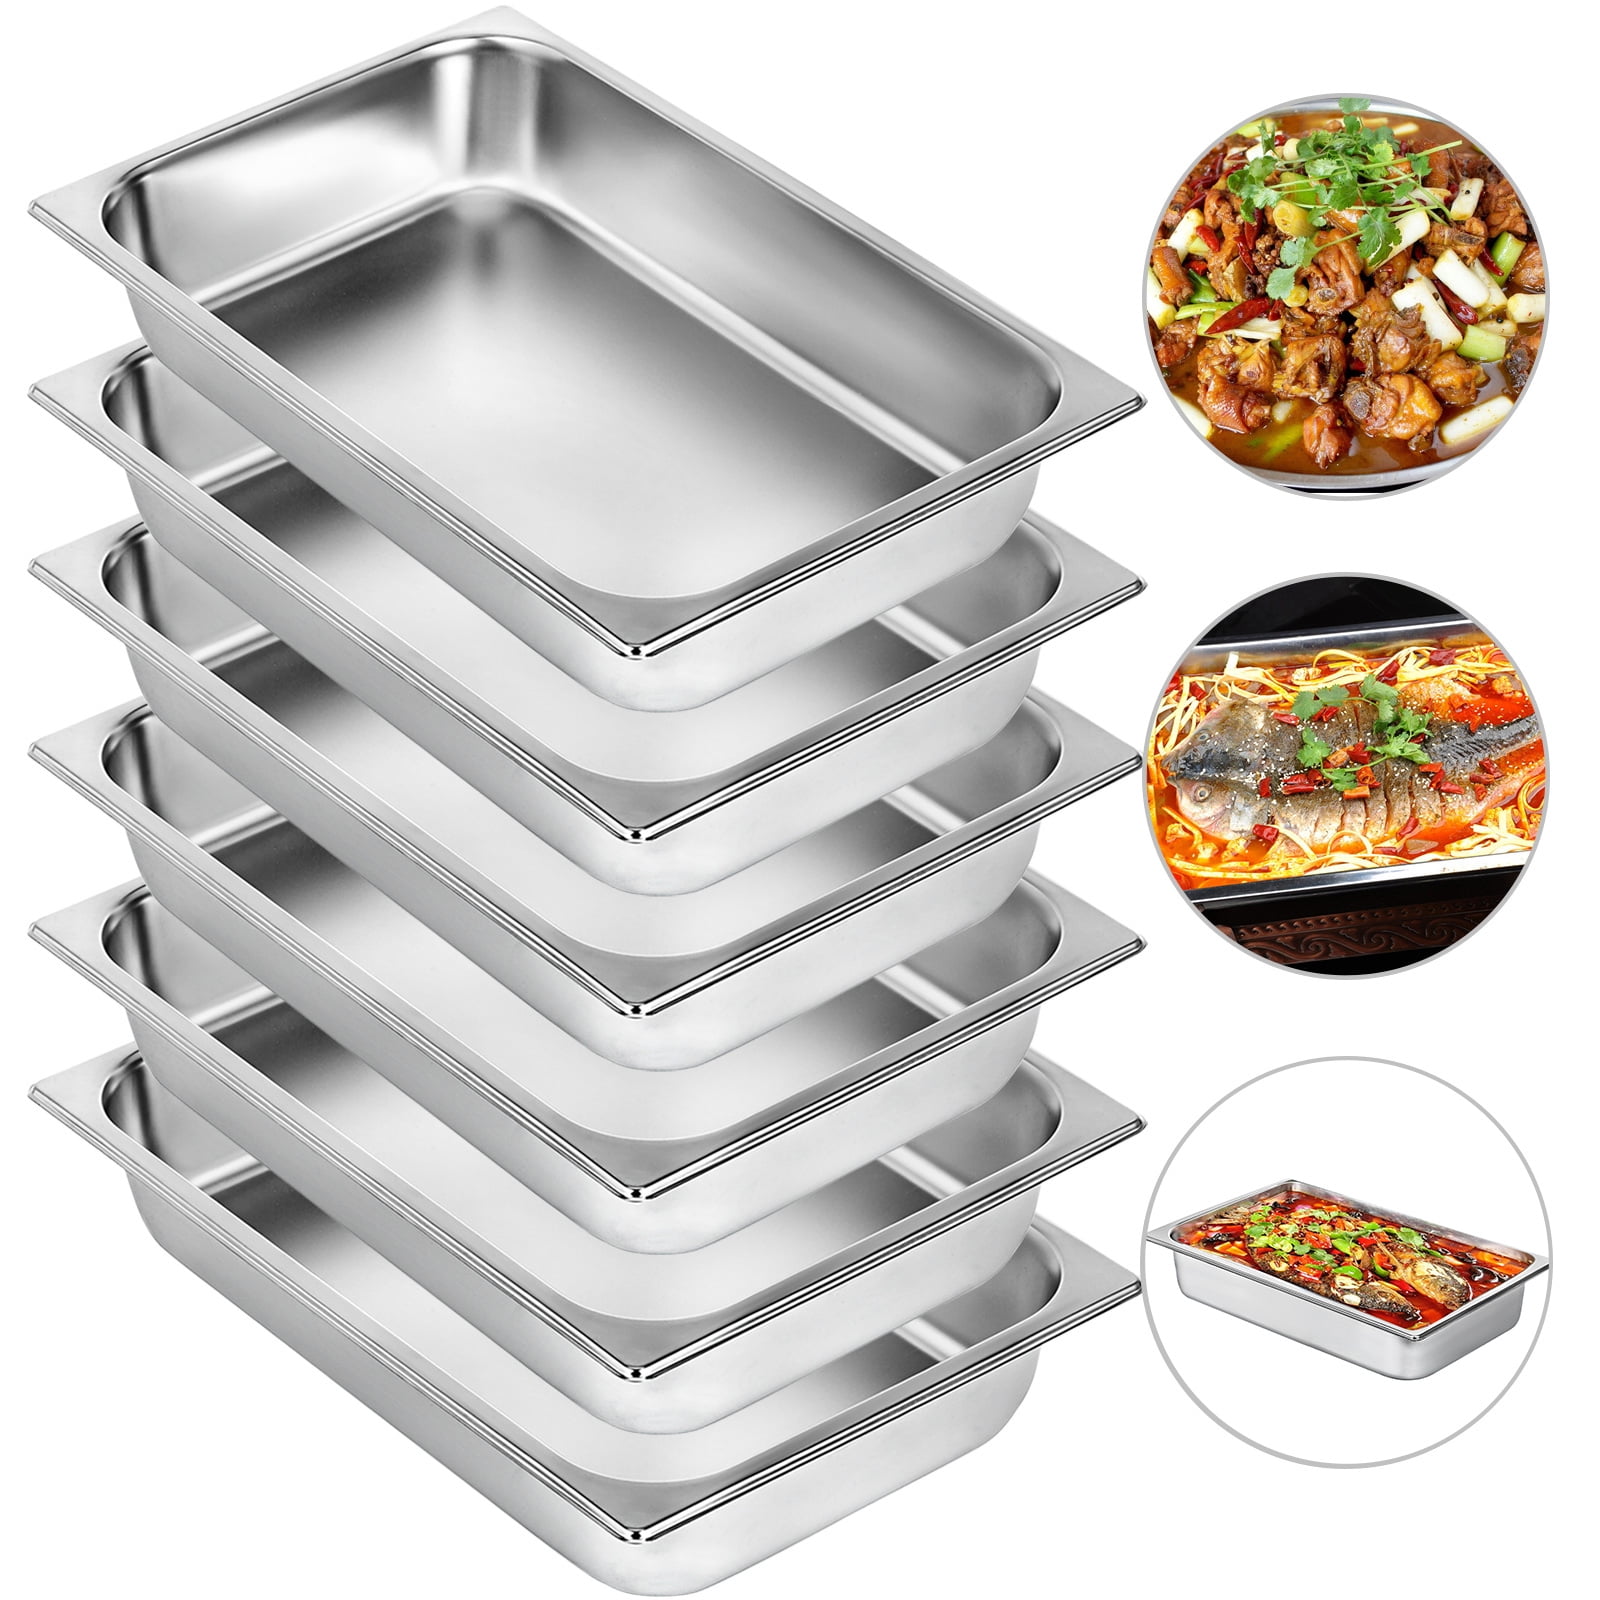 Ful Size 6" Deep Stainless Steel Steam Table Hotel Buffet Restaurant Pans 4PACK 